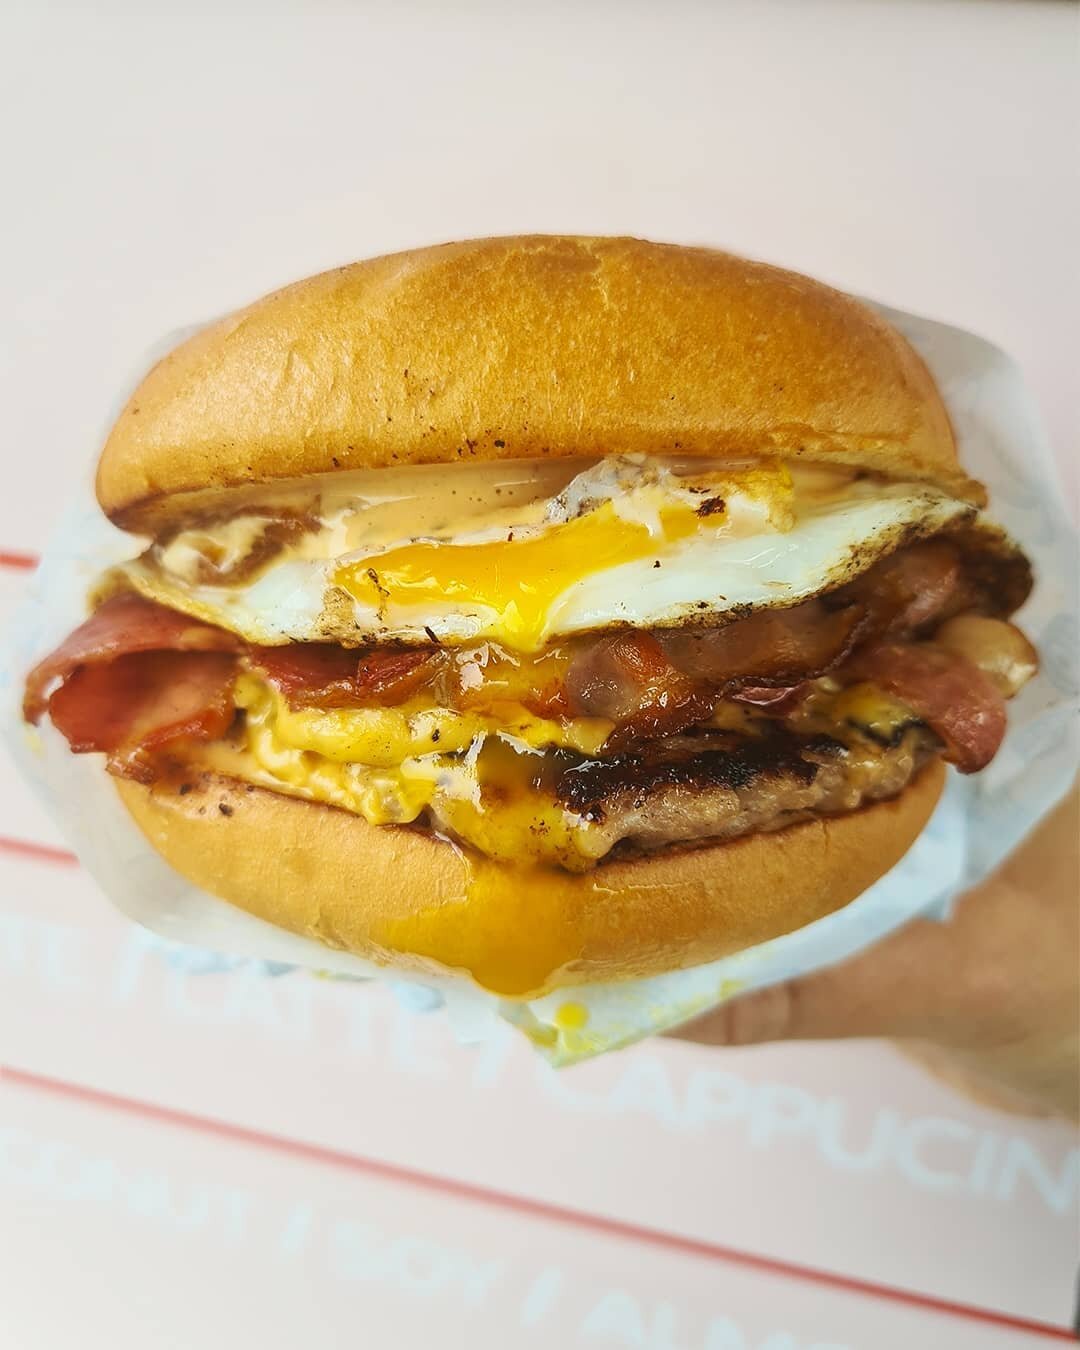 💥 BREAKFAST AT PUCK! 💥

We have added some breakfast items that will be available Wed - Sun 8am - 12pm 😁🤙

Breakfast Brioche - 
Sausages Puck
Bacon
Egg
Puck Sauce
Cheddar
Caramelised Onion

Bacon Brioche - 
Bacon
Egg
Smashed avocado
Feta
Pickled 